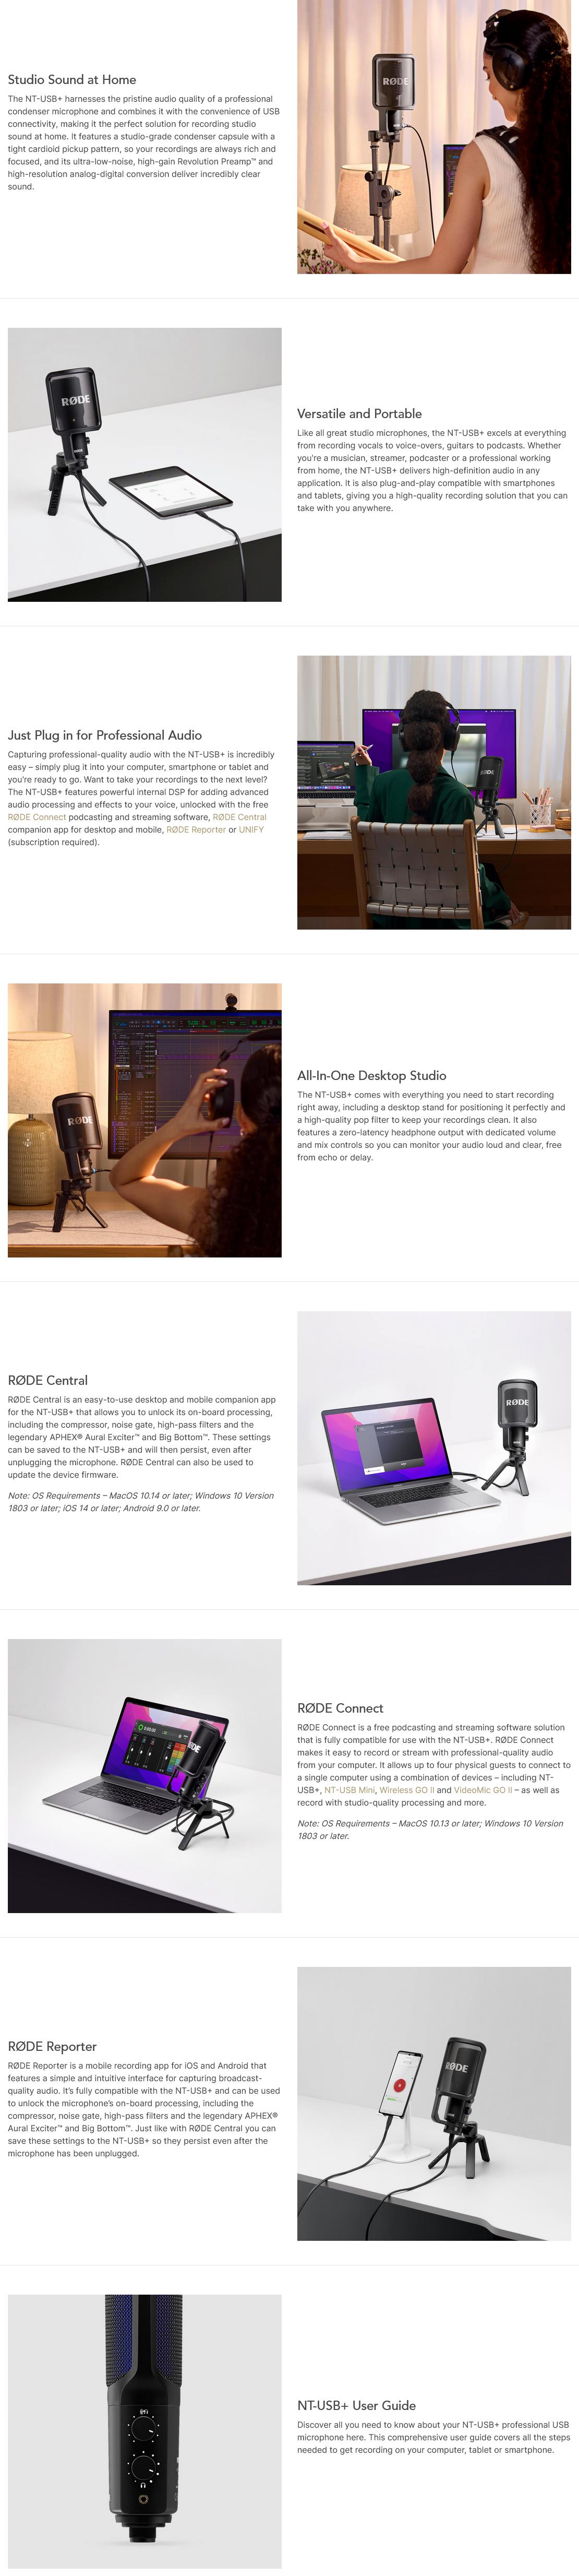 A large marketing image providing additional information about the product RØDE NT-USB+ Professional USB Microphone - Additional alt info not provided